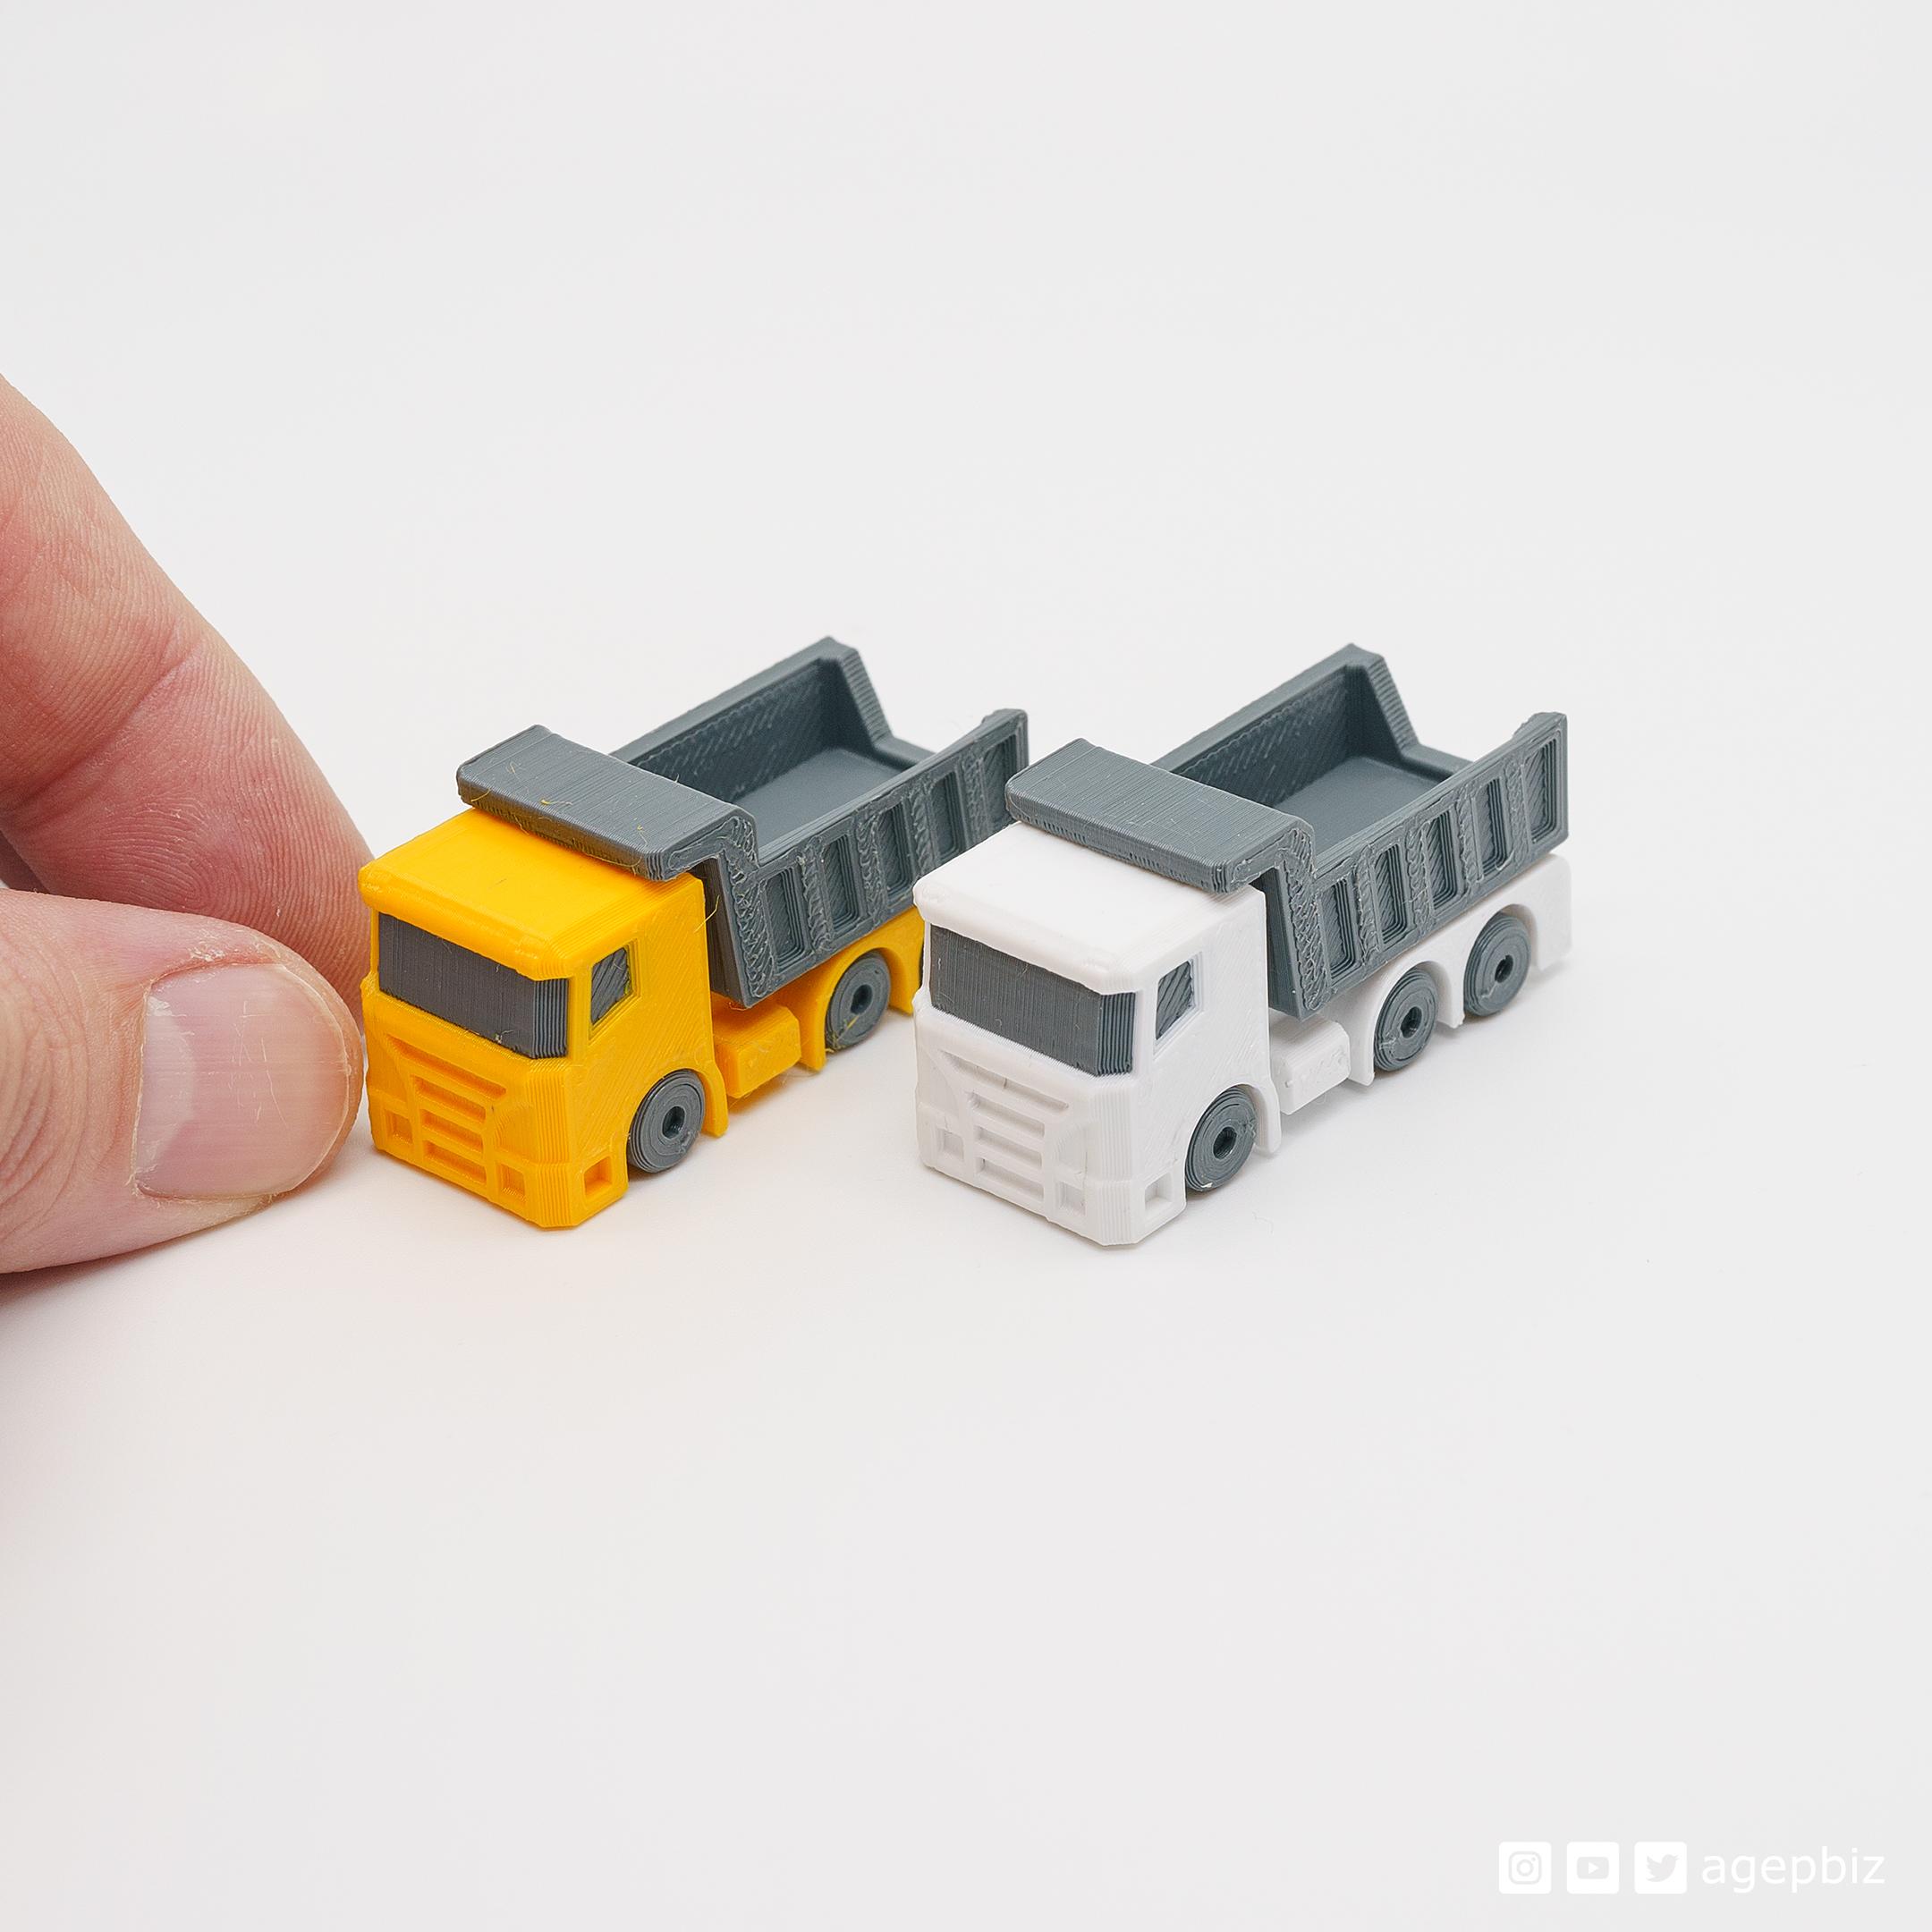 Dual Color Print-in-Place and Articulated Dump Truck 3d model